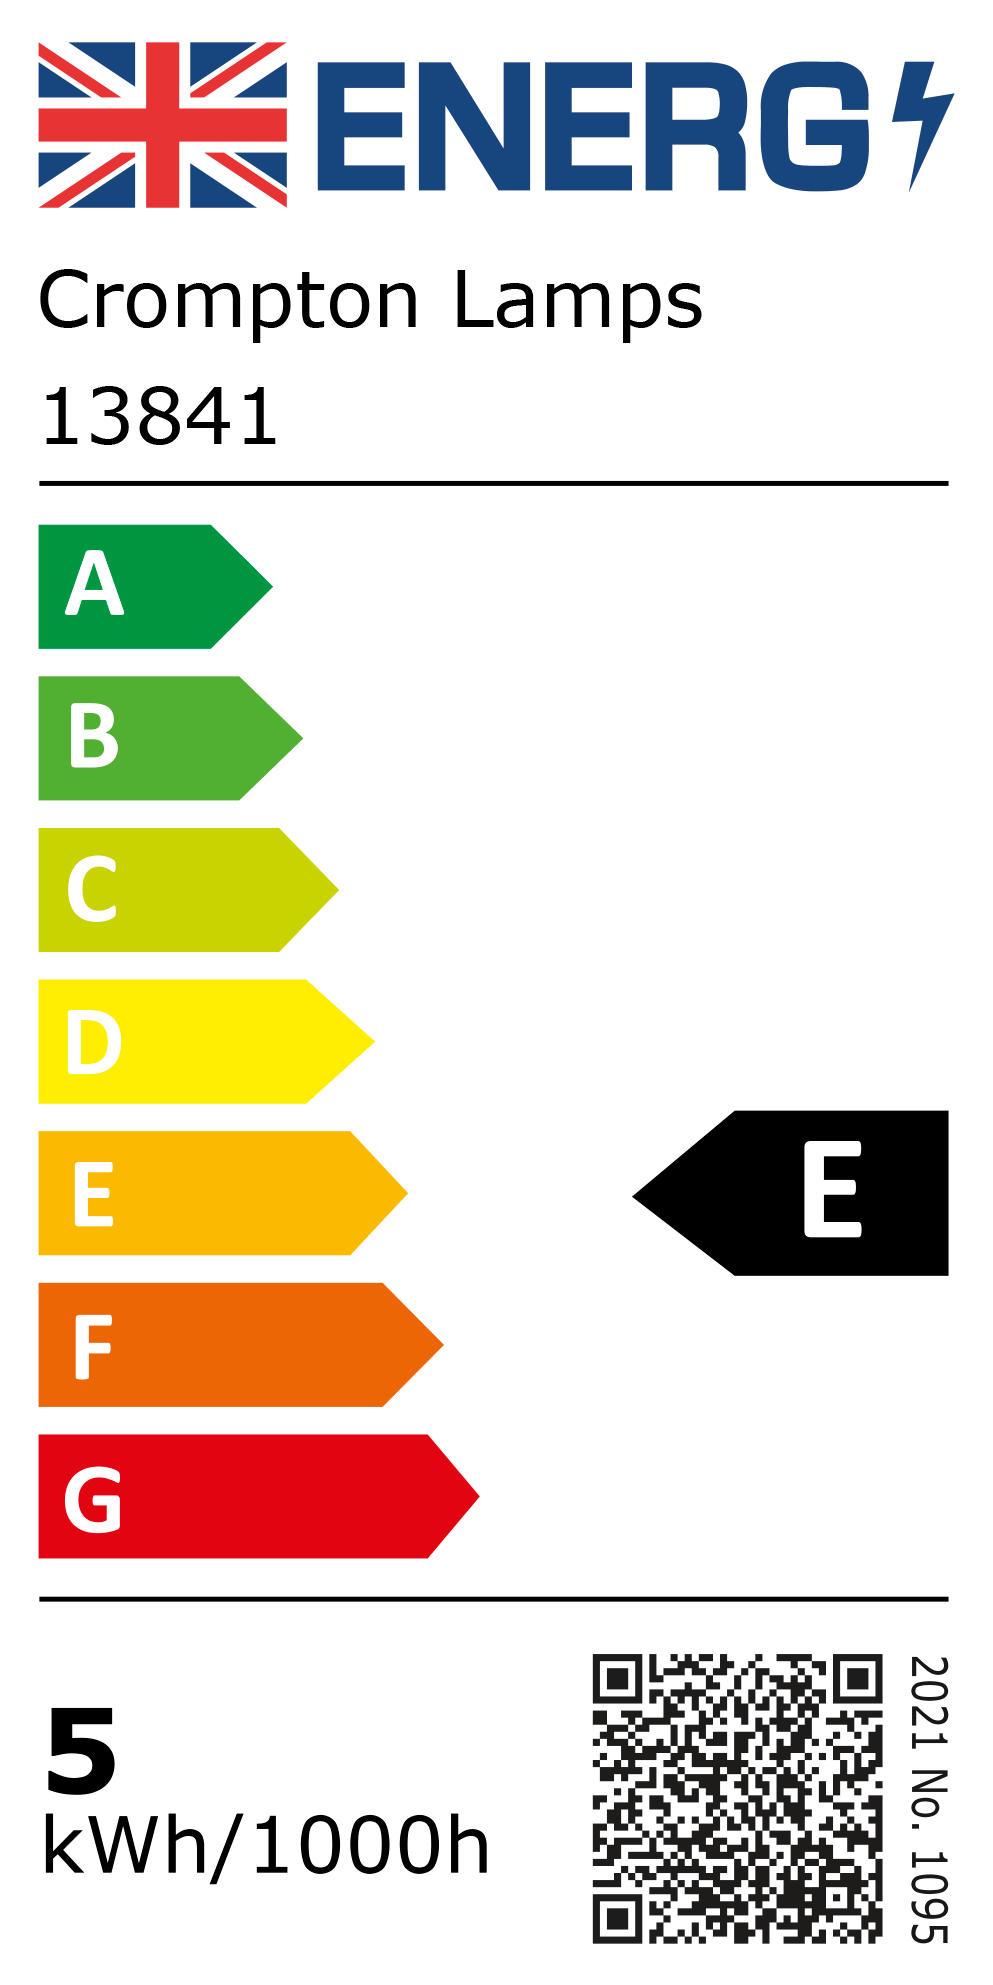 New 2021 Energy Rating Label: Stock Code 13841